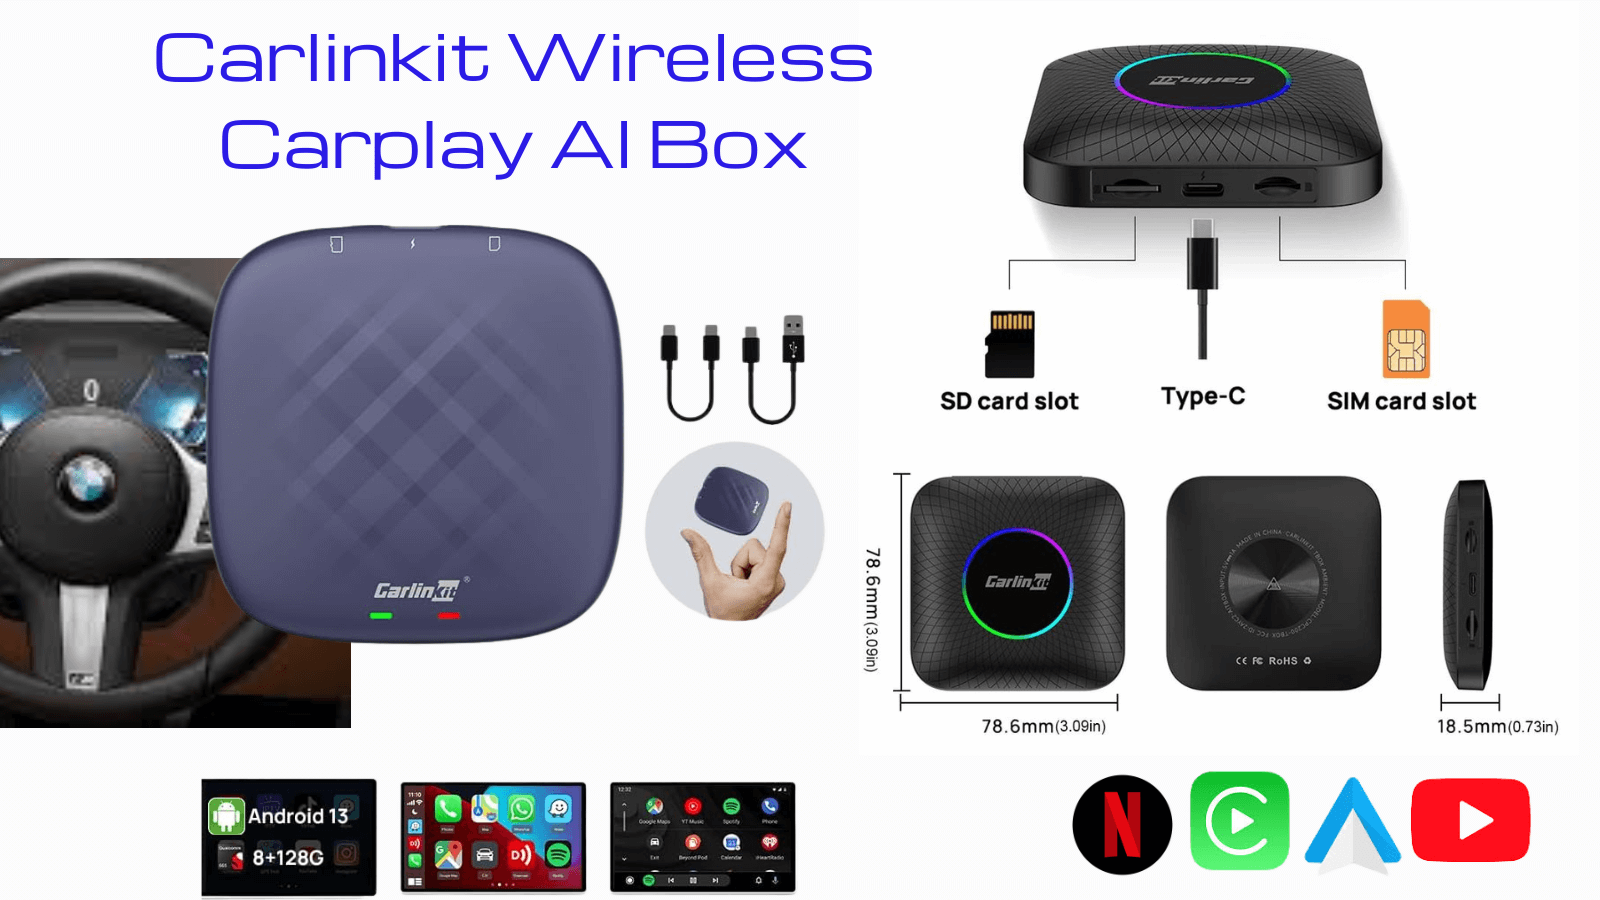 Carlinkit wireless CarPlay adapter for Netflix and Youtube video streaming